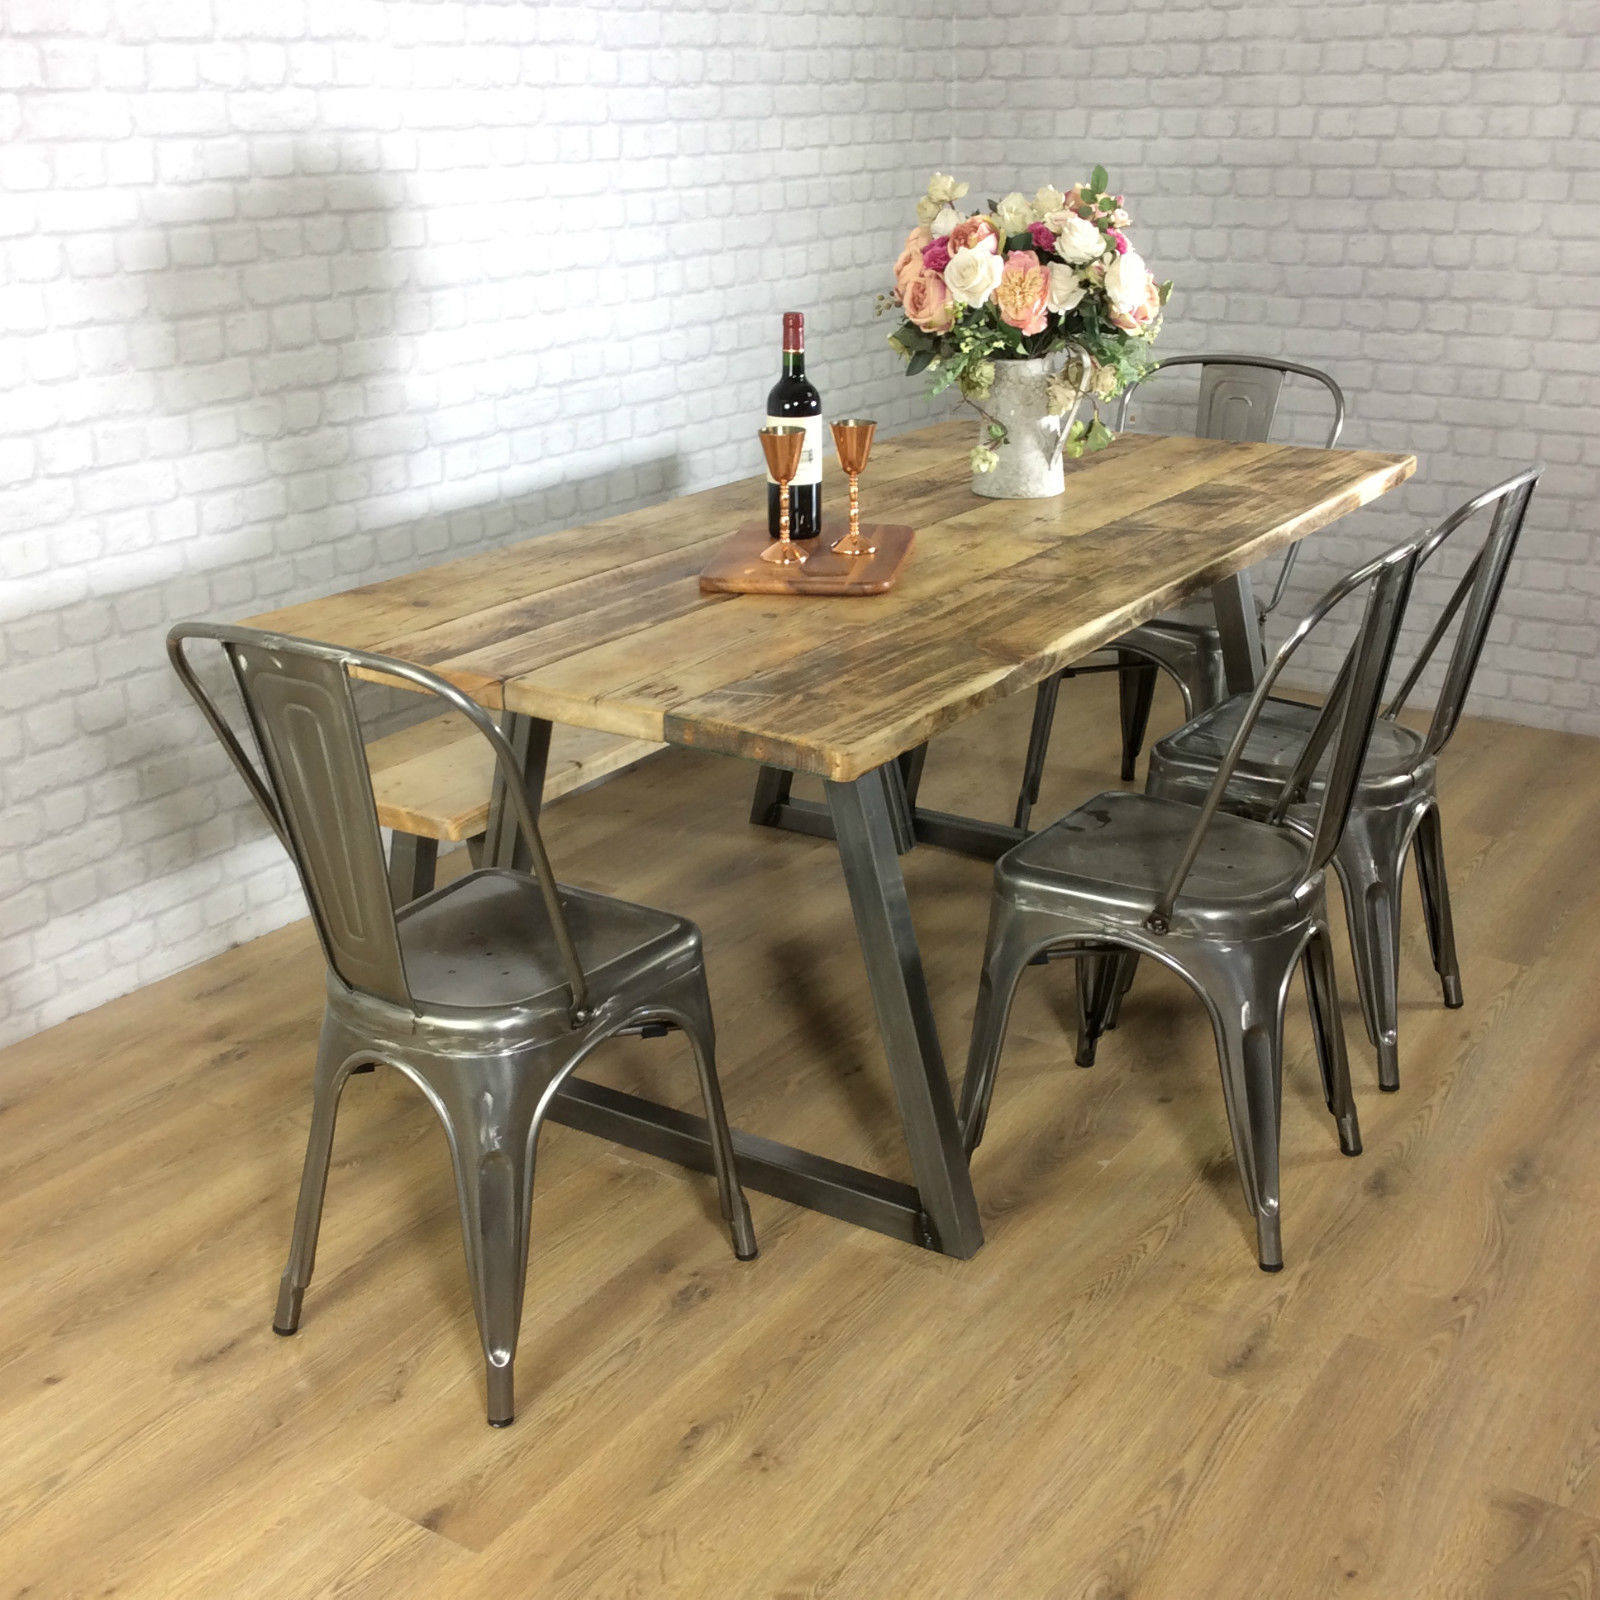 Rustic Dining Table Industrial 6 8 Seater Solid Reclaimed Wood Metal B Shabby Bear Cottage